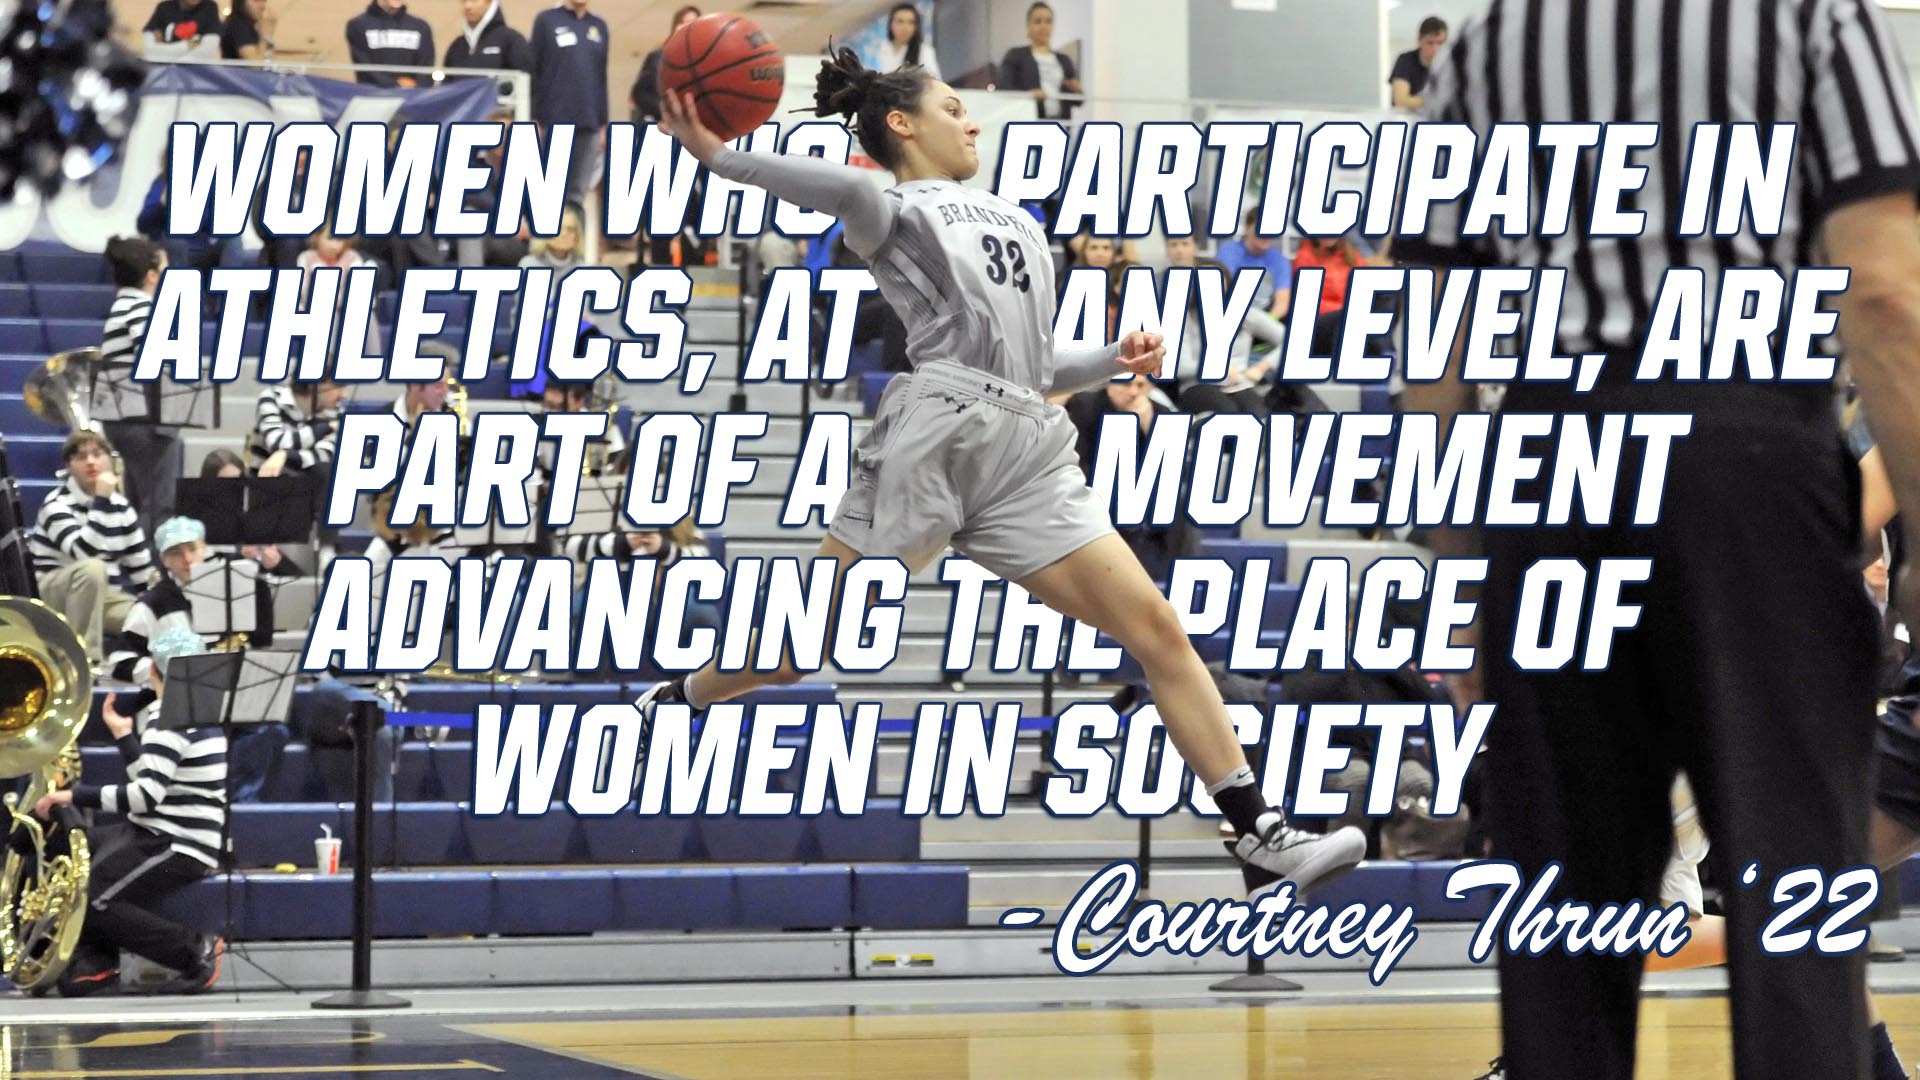 Basketball player Courtney Thrun leaping through text that reads: Women who participate in athletics, at any level, are part of a movement advancing the place of women in society.